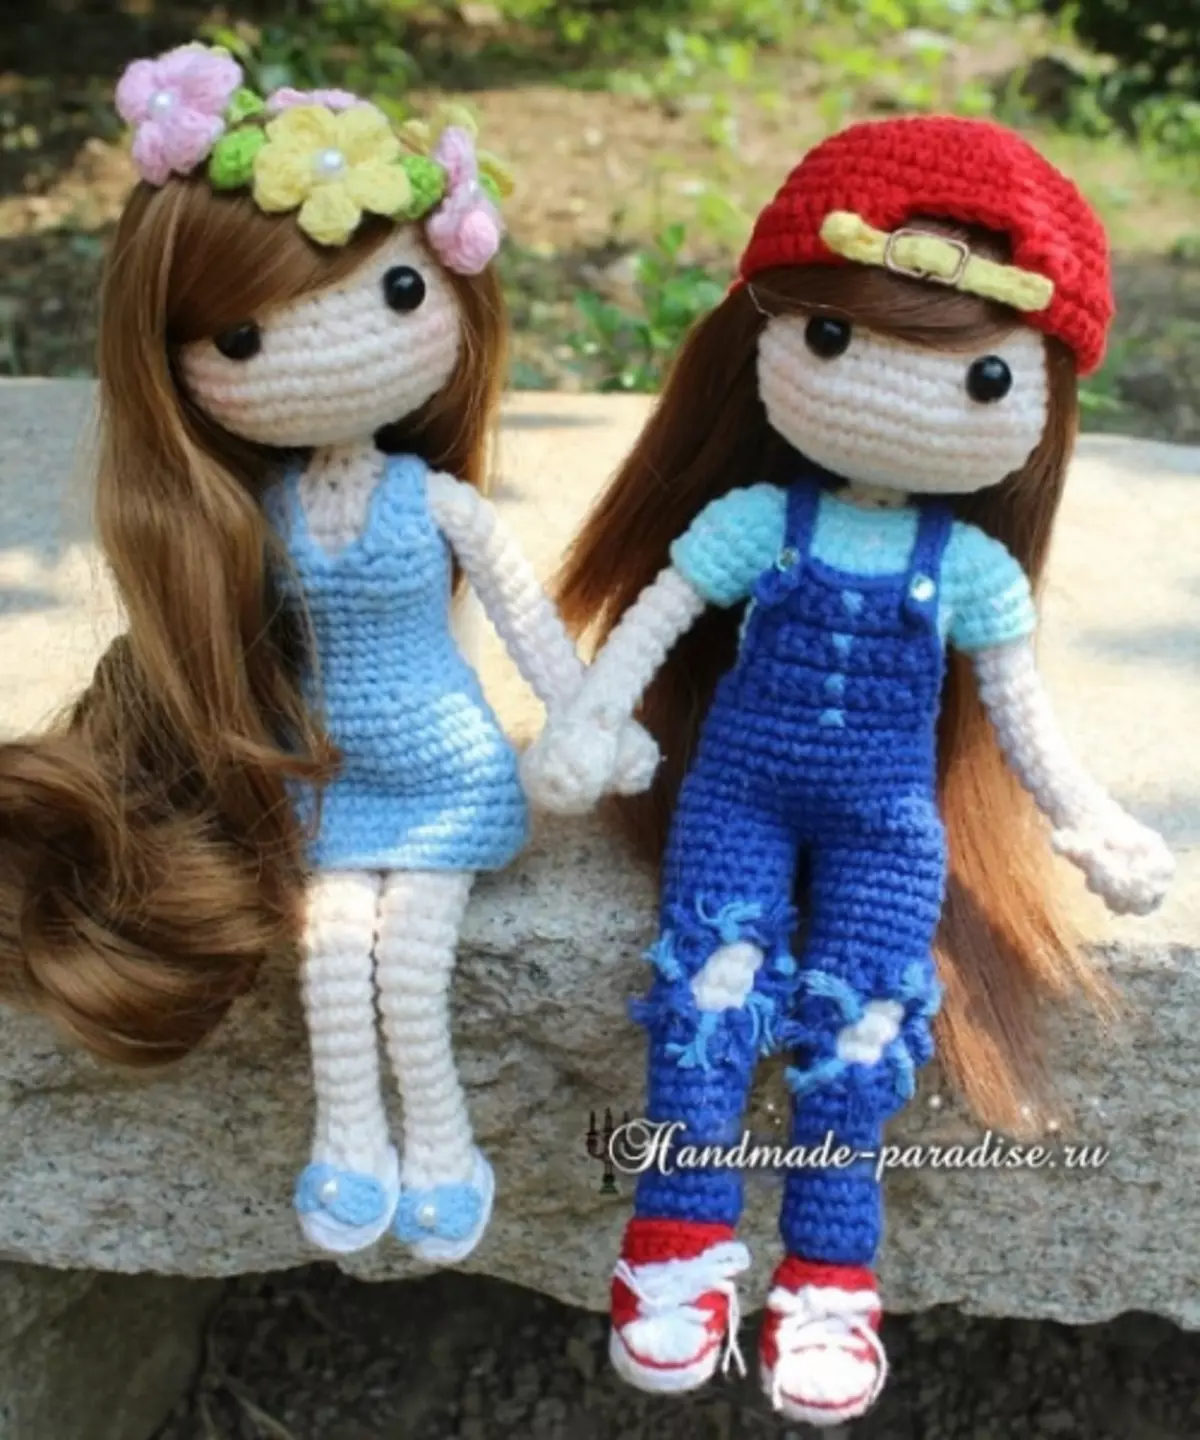 Knitted Fashion for Doll Amigurumi. Skema's